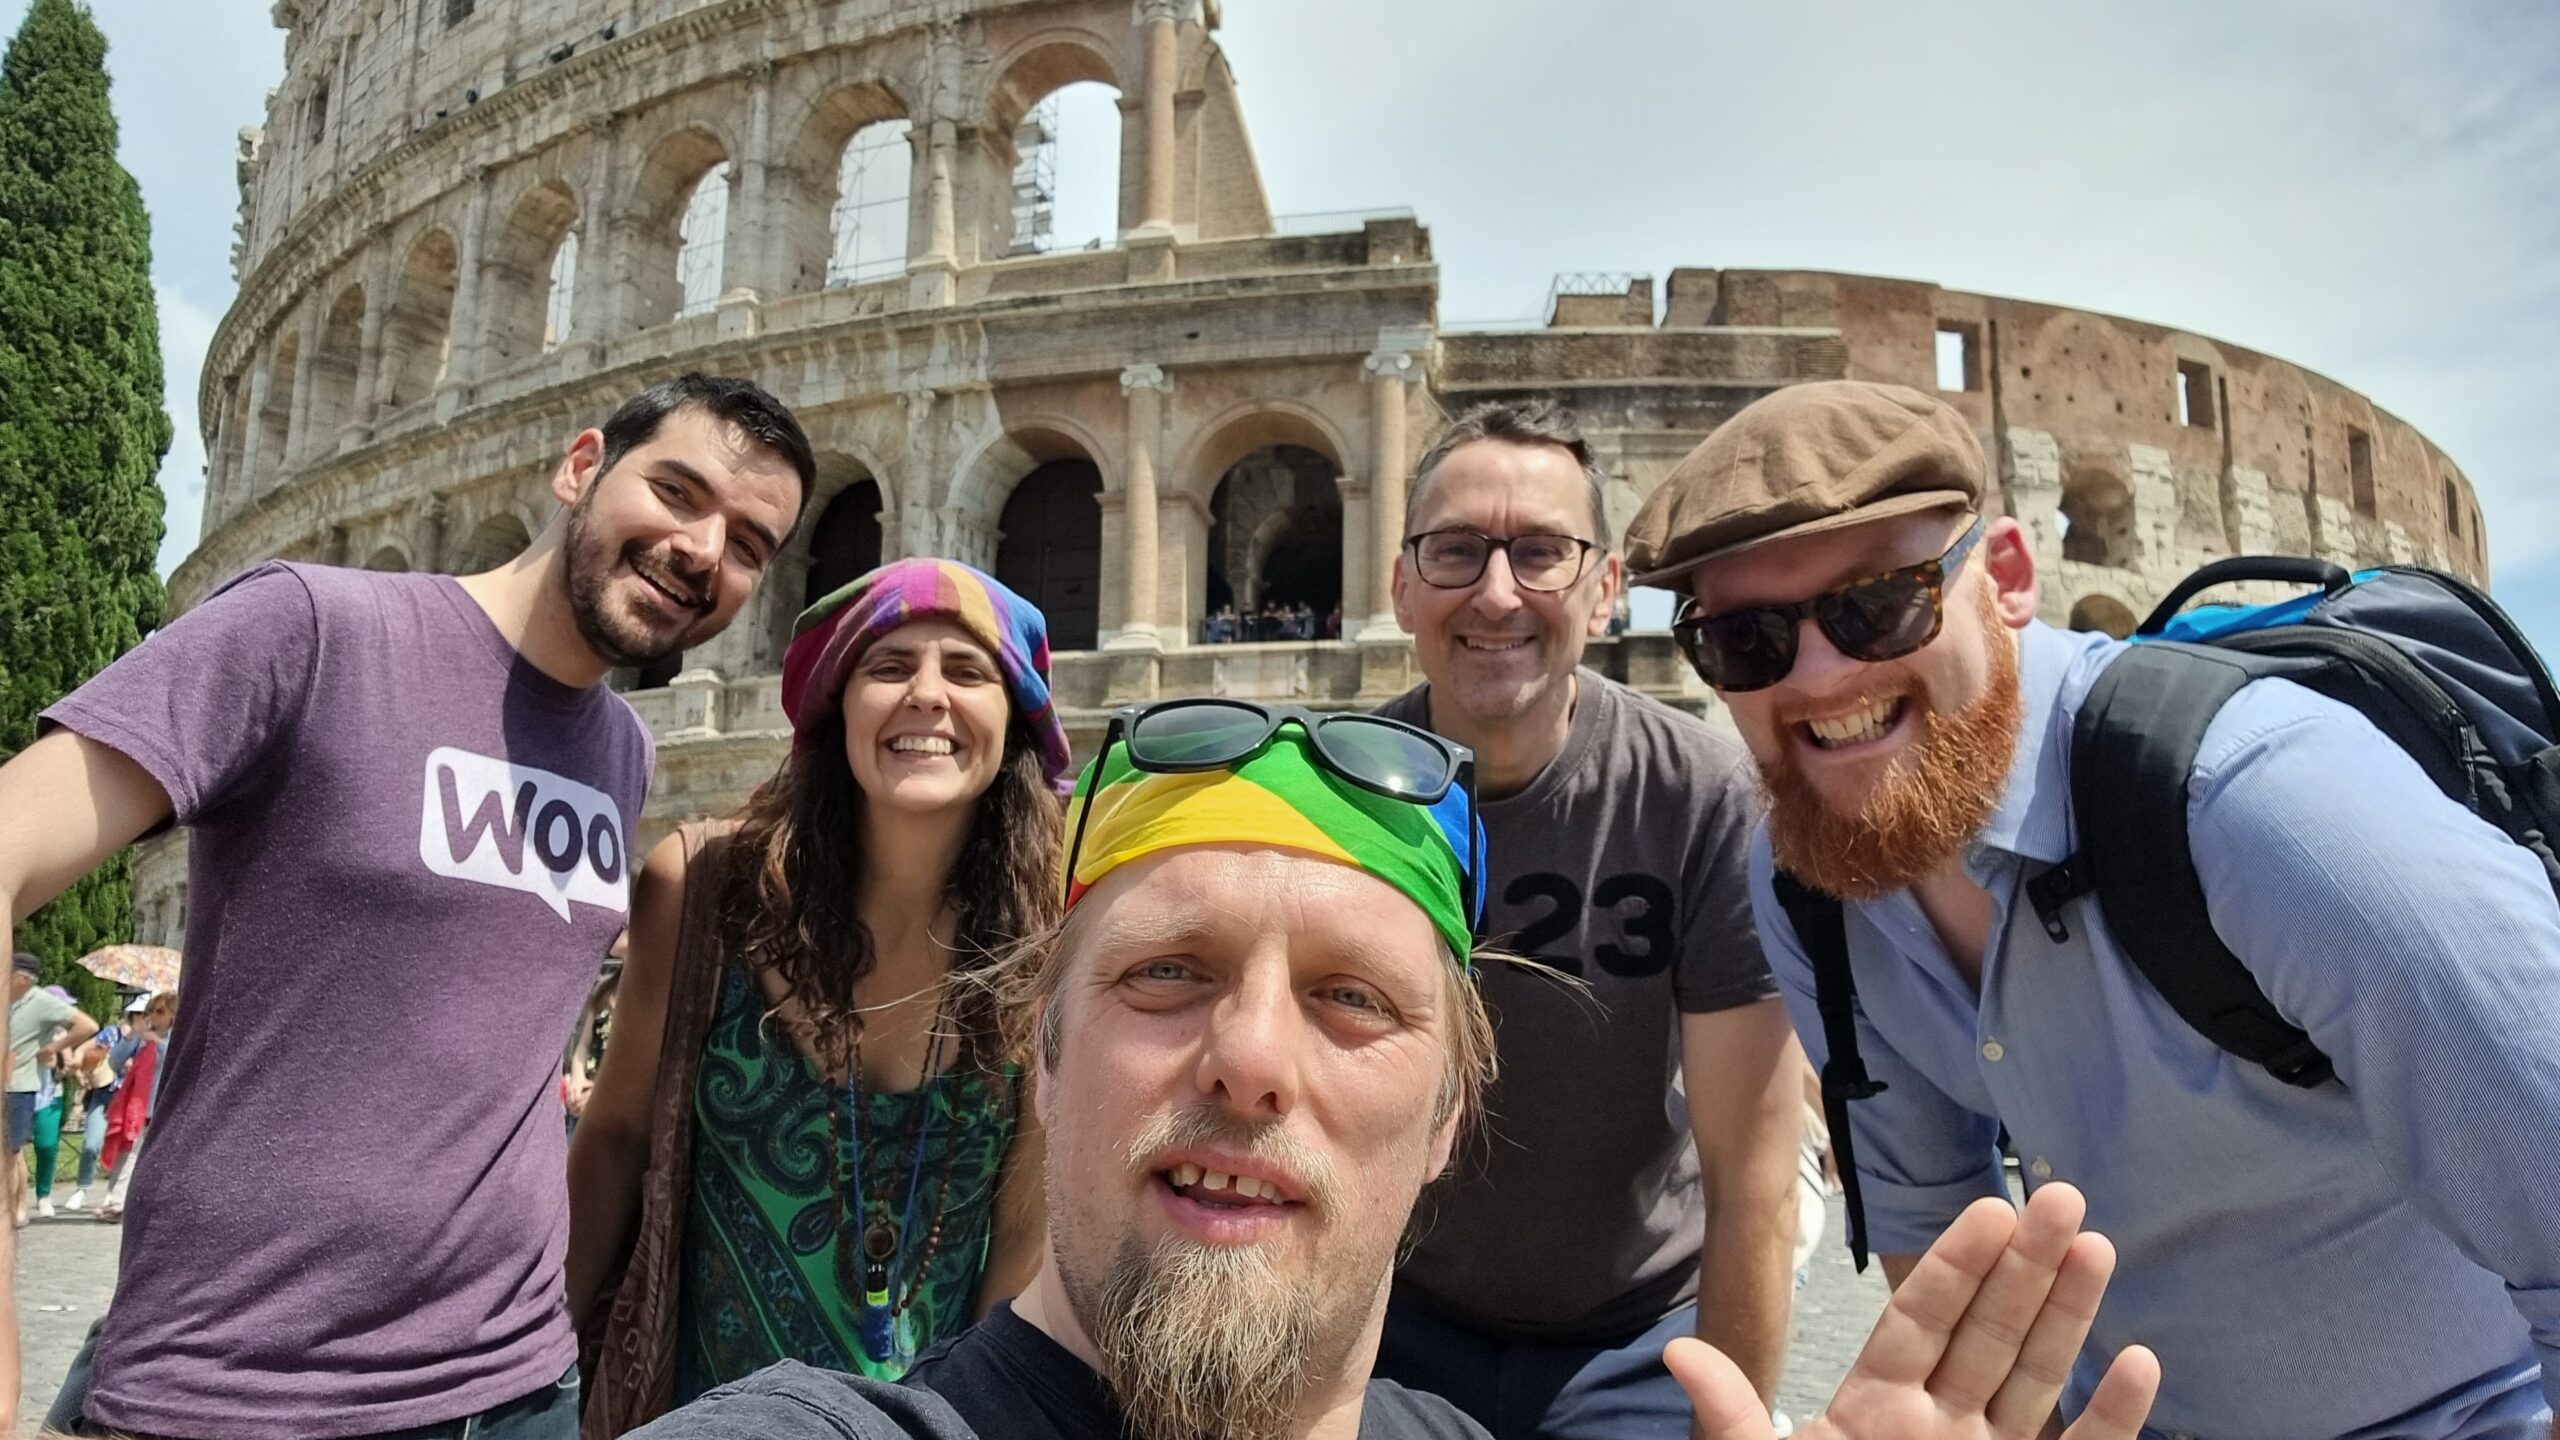 Dan (wearing a rainbow bandana) waves at the camera; behind him are four work colleagues, and behind that the Colosseum in Rome.